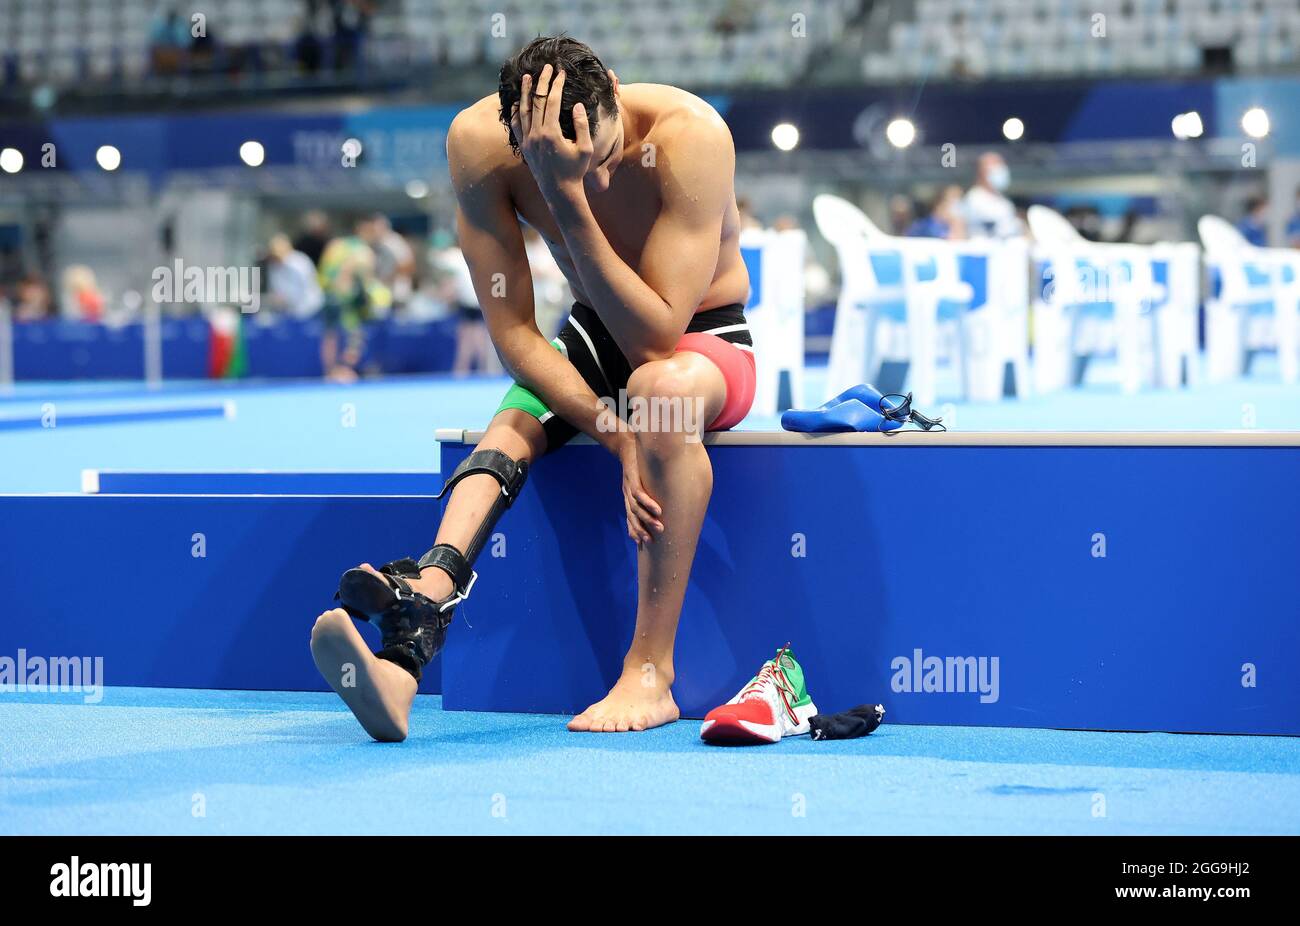 Tokyo 2020 Paralympic Games - Swimming - Men's 100m Backstroke - S9 Final –  Tokyo Aquatics Centre, Tokyo, Japan - August 30, 2021. Simone Barlaam of  Italy reacts after competing REUTERS/Bernadett Szabo Stock Photo - Alamy